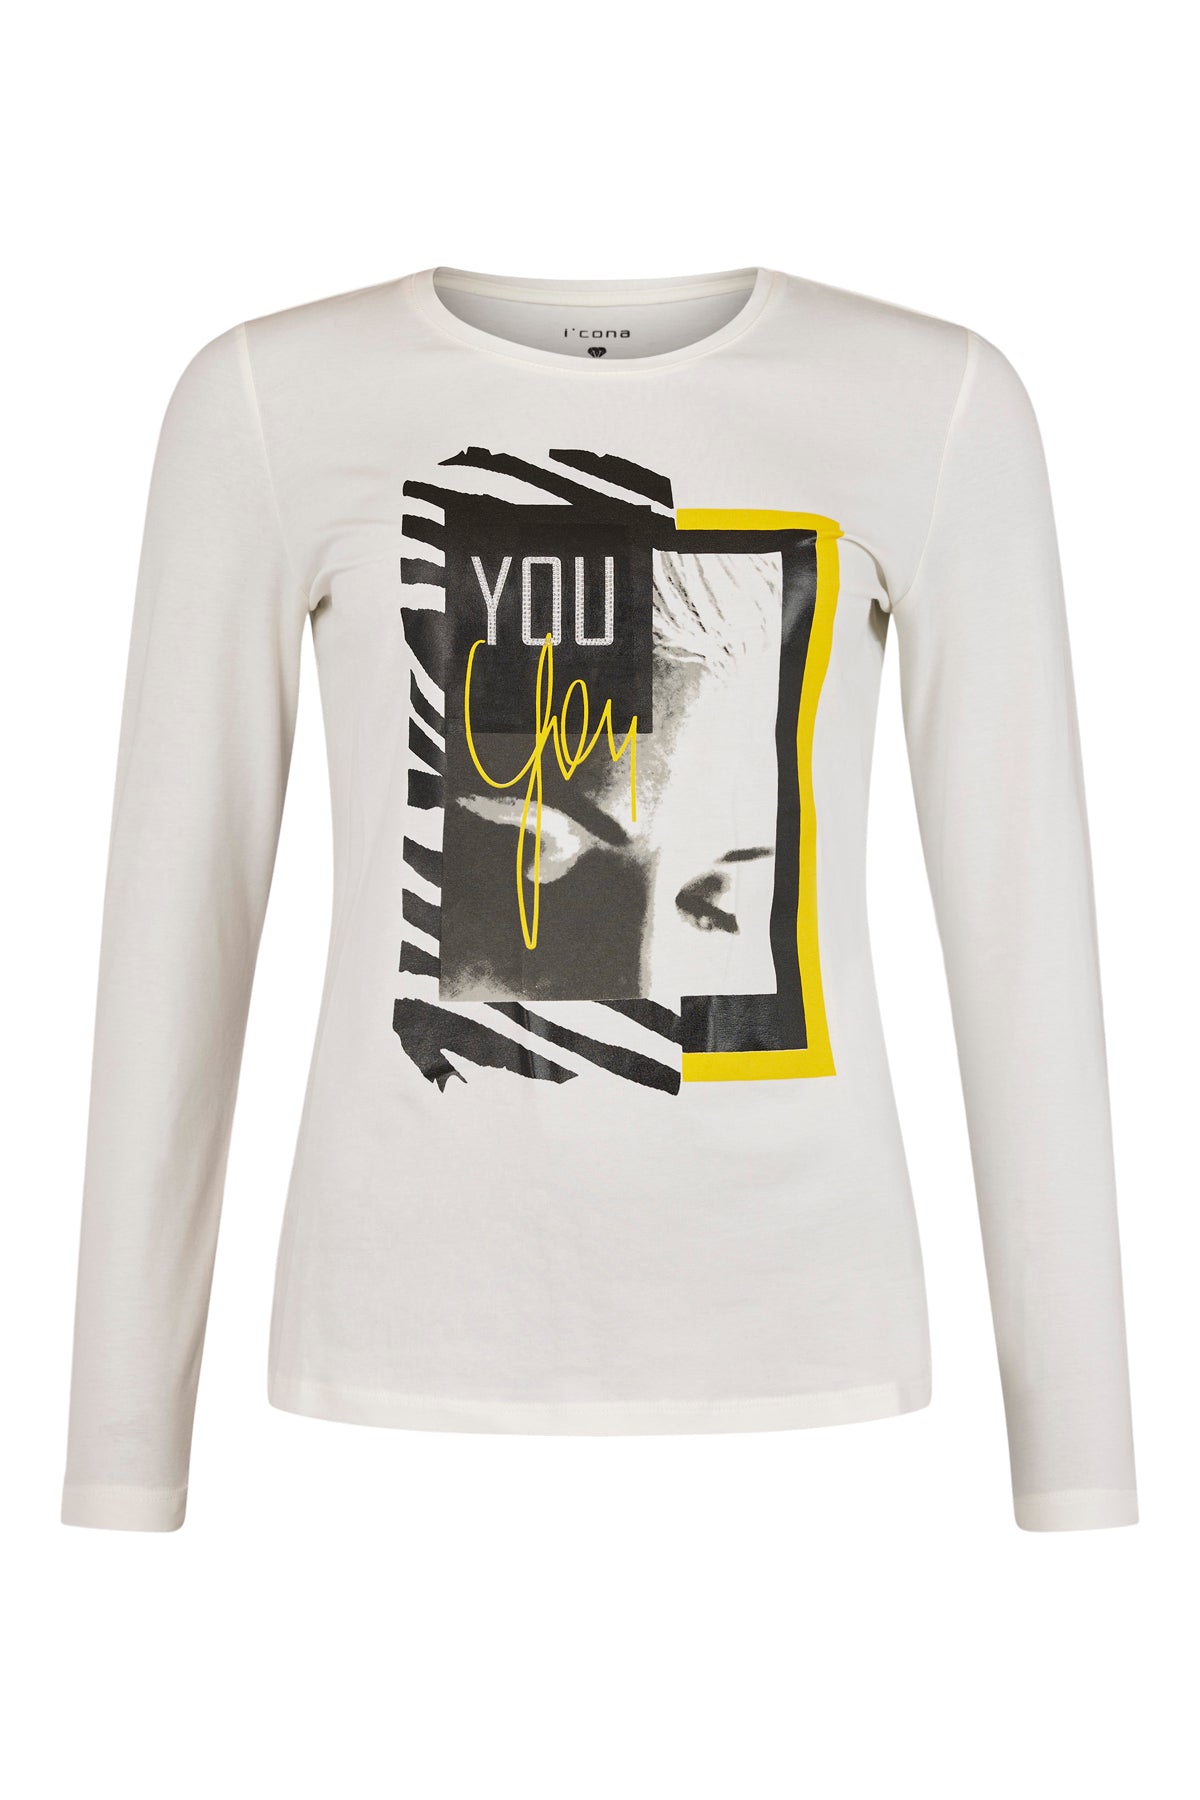 Cream Long Sleeve 'You' Graphic Print Top